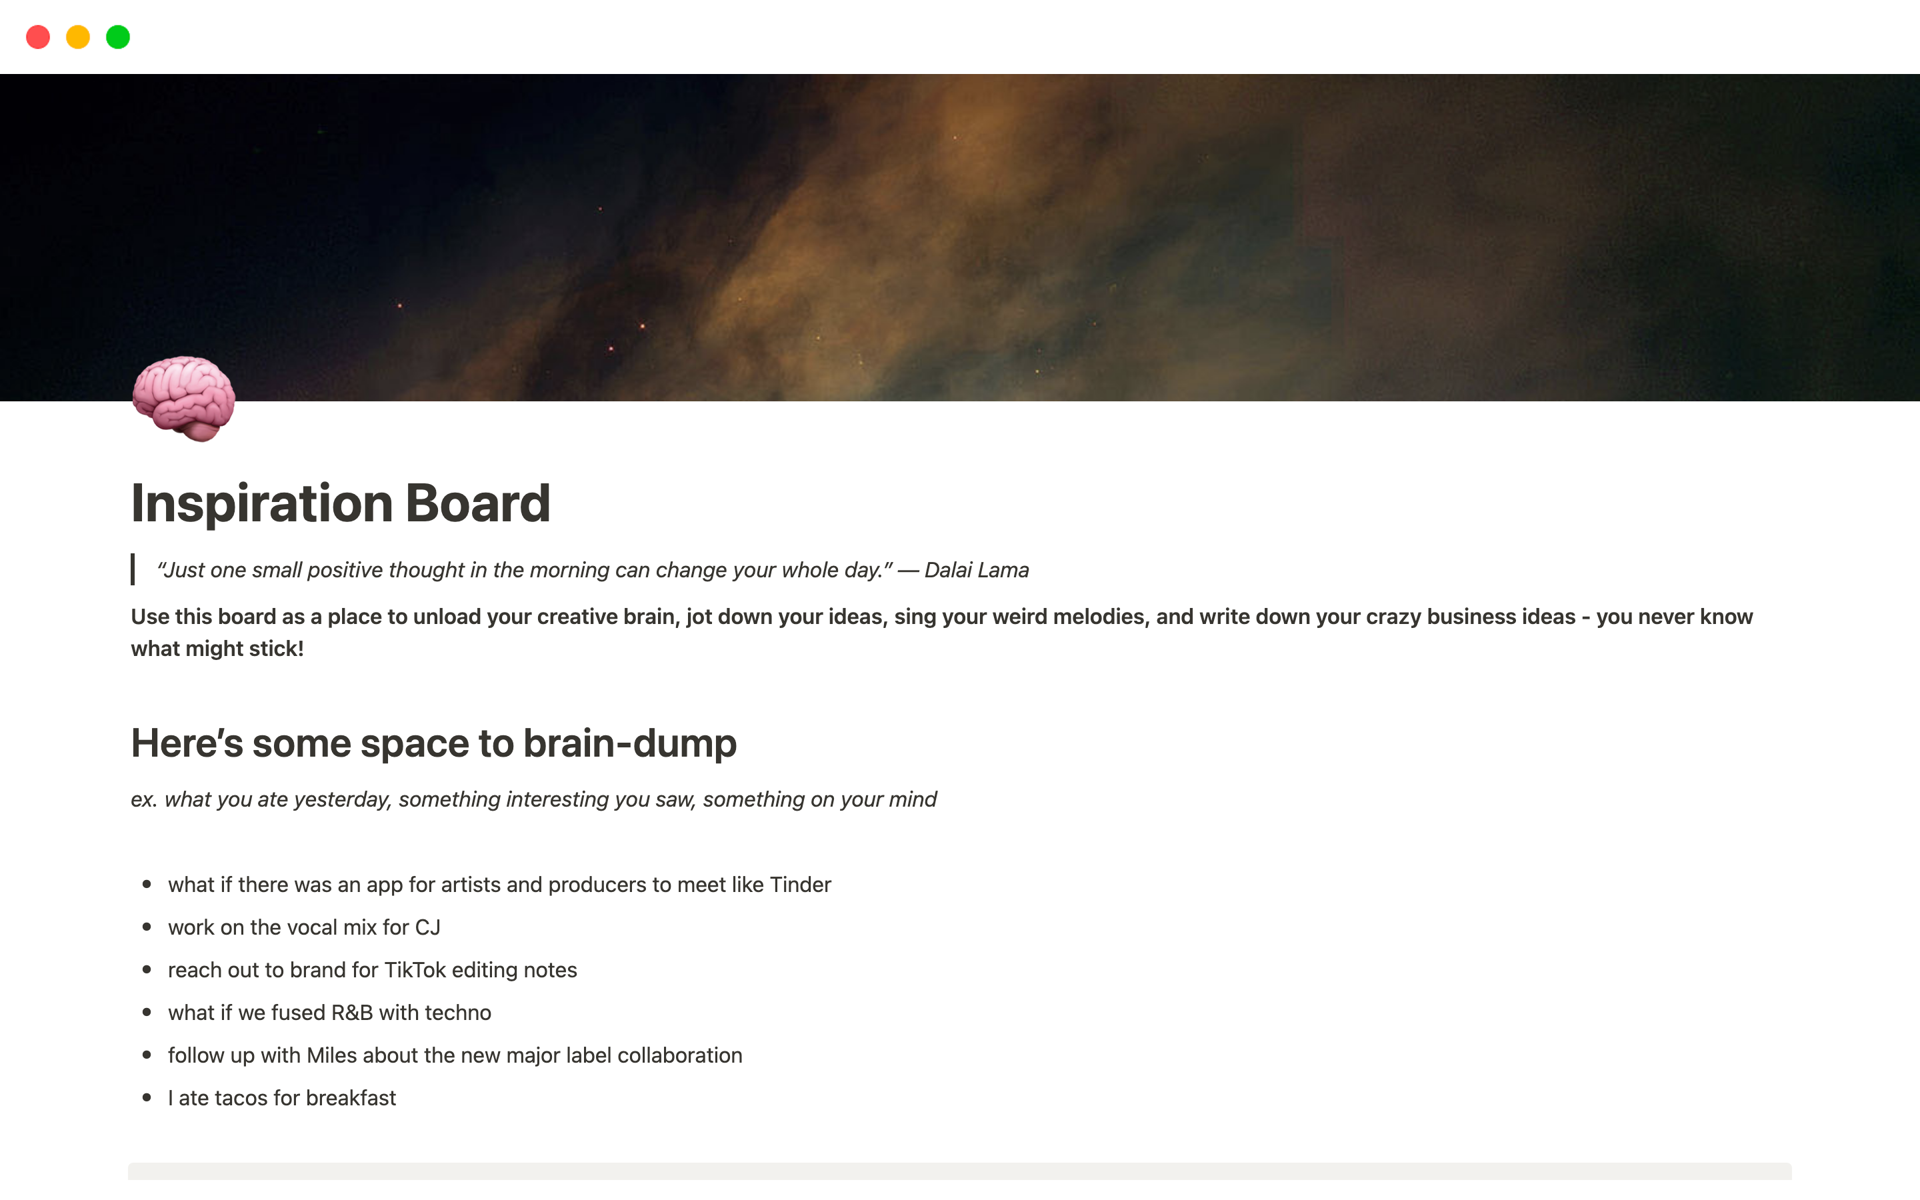 Introducing the Inspiration Board for Notion, specially designed for music industry professionals and music producers to write down ideas, thoughts, and voice memos quickly.